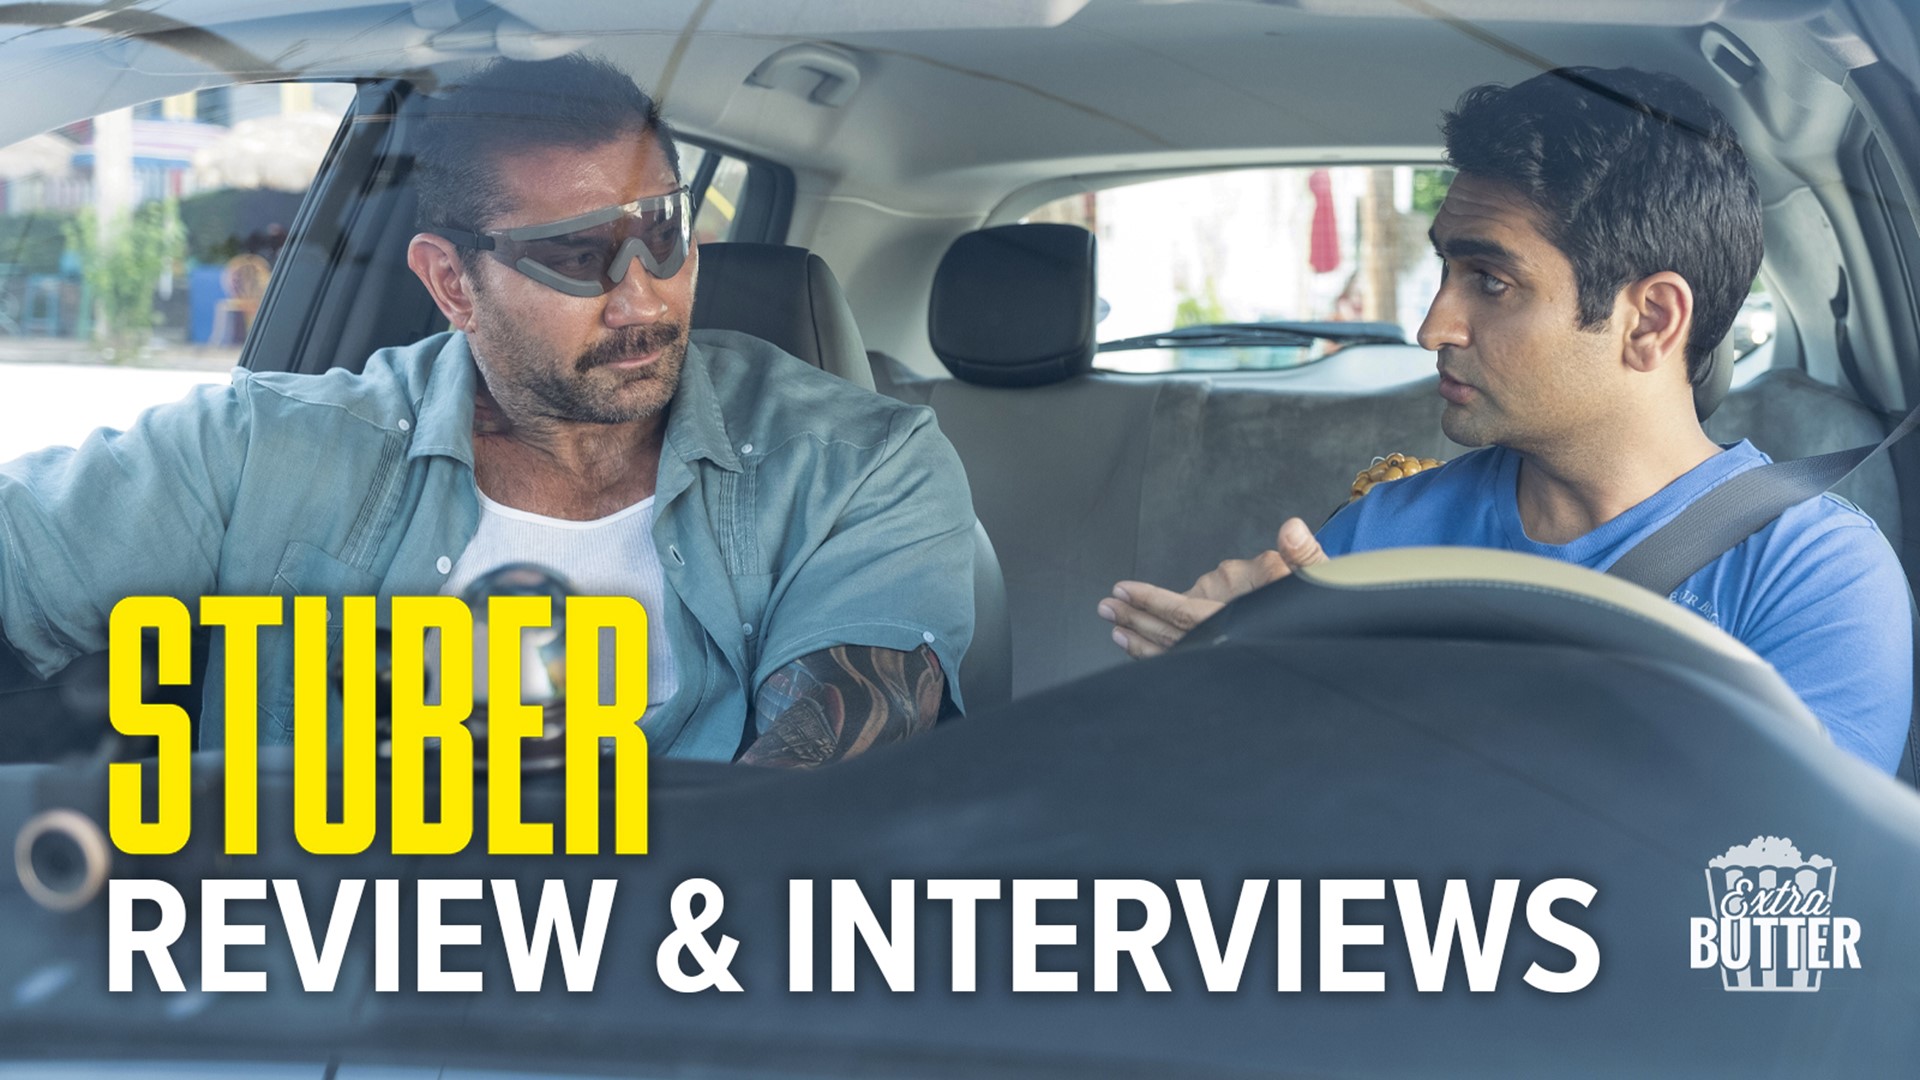 Dave Bautista and Kumail Nanjiani talk about the comedy and action in the new movie 'Stuber.' Mark S. Allen says you will be surprised by how funny the movie actually is.